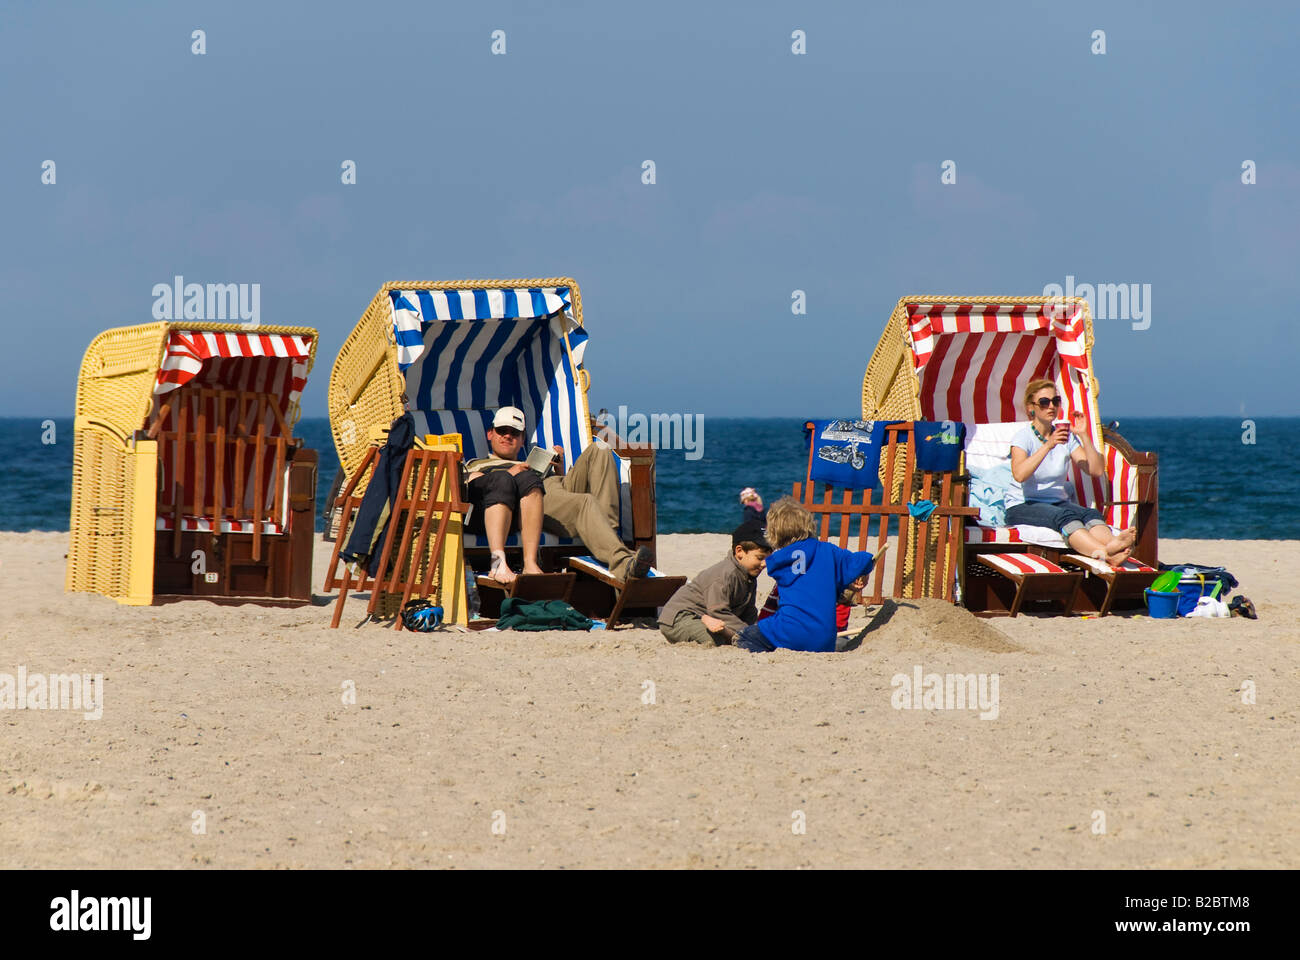 Tourists relaxing in roofed wicker beach chairs, Travemuende Beach, Schleswig-Holstein, Germany, Europe Stock Photo